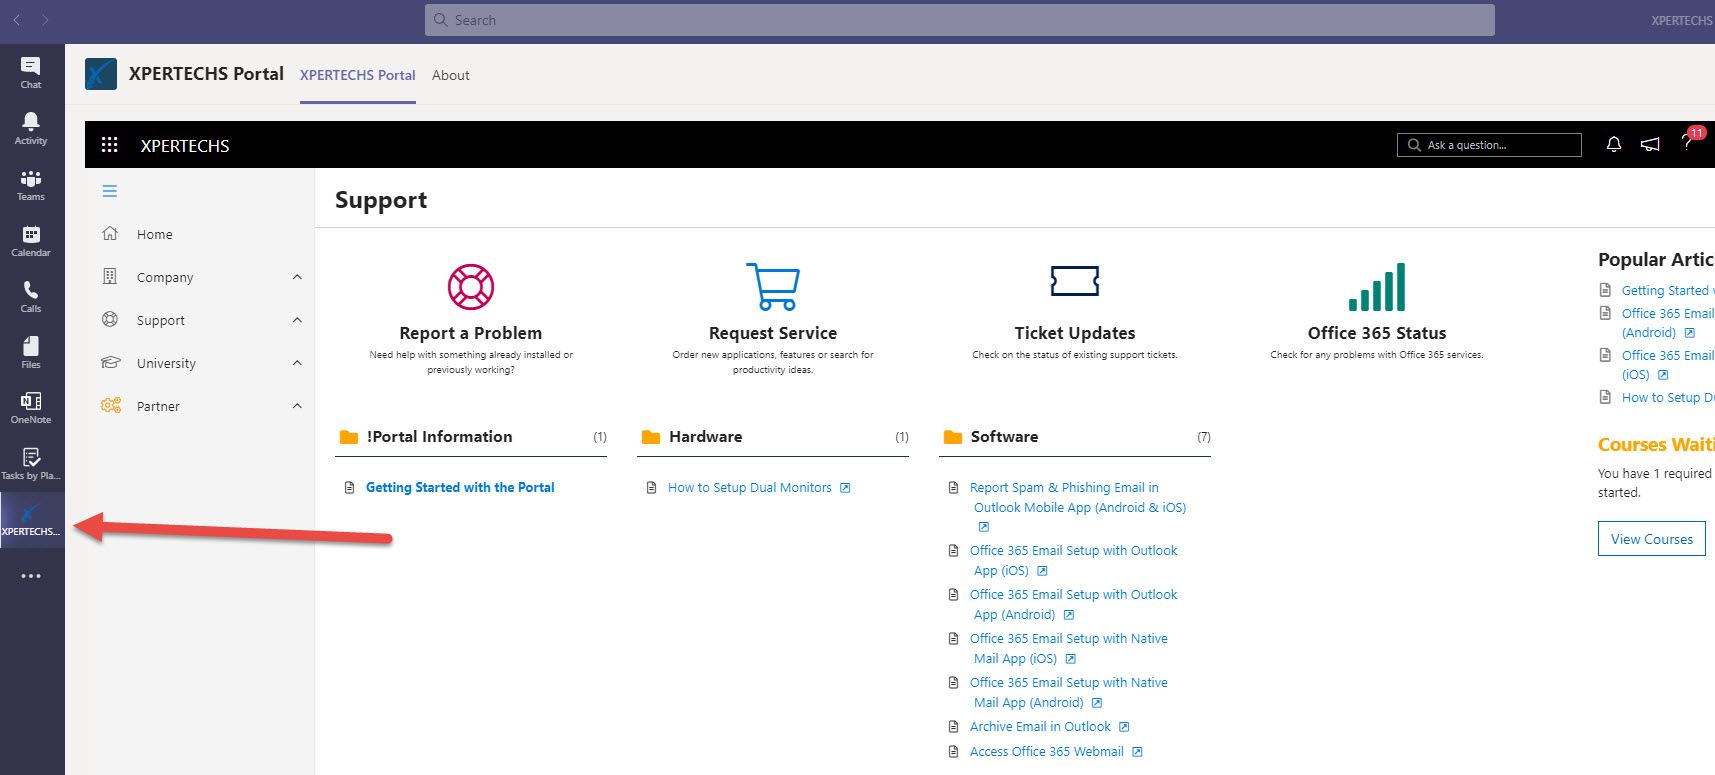 Accessing XPERTECHS support in Microsoft Teams